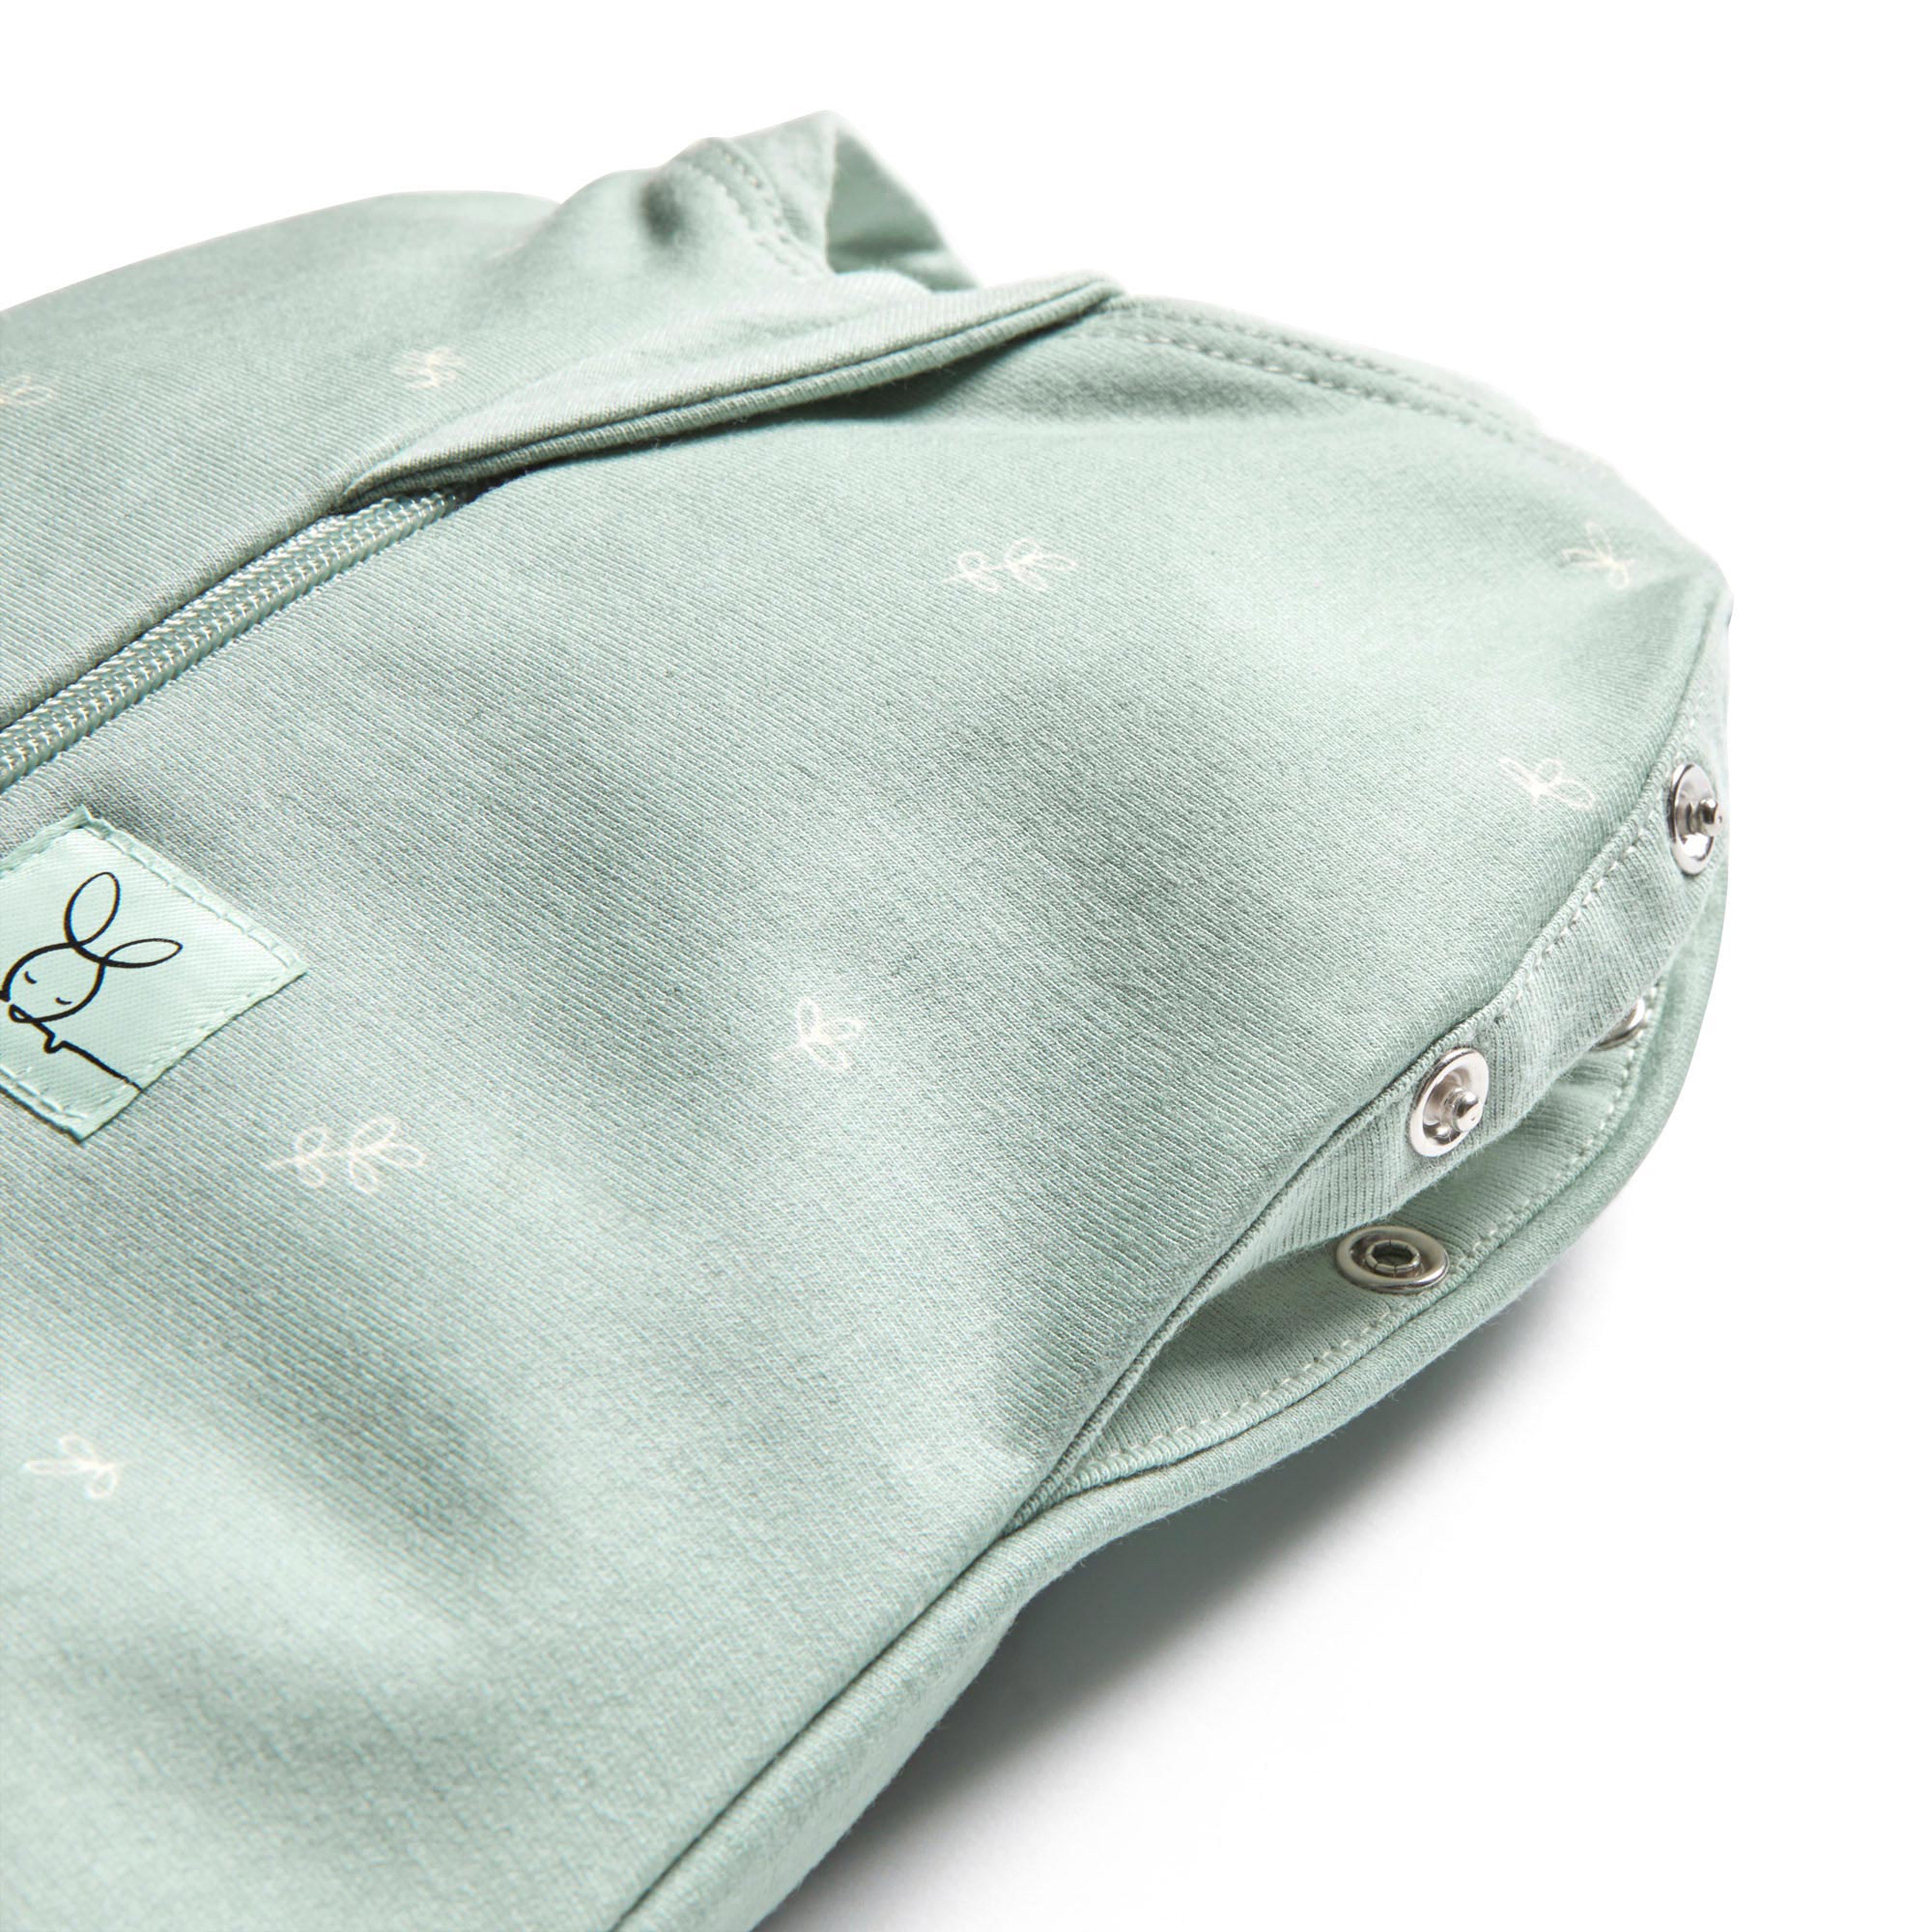 ergopouch-cocoon-swaddle-bag-1-0-tog-night-sky-ergo-zepco-1-0t03-06mns20- (4)